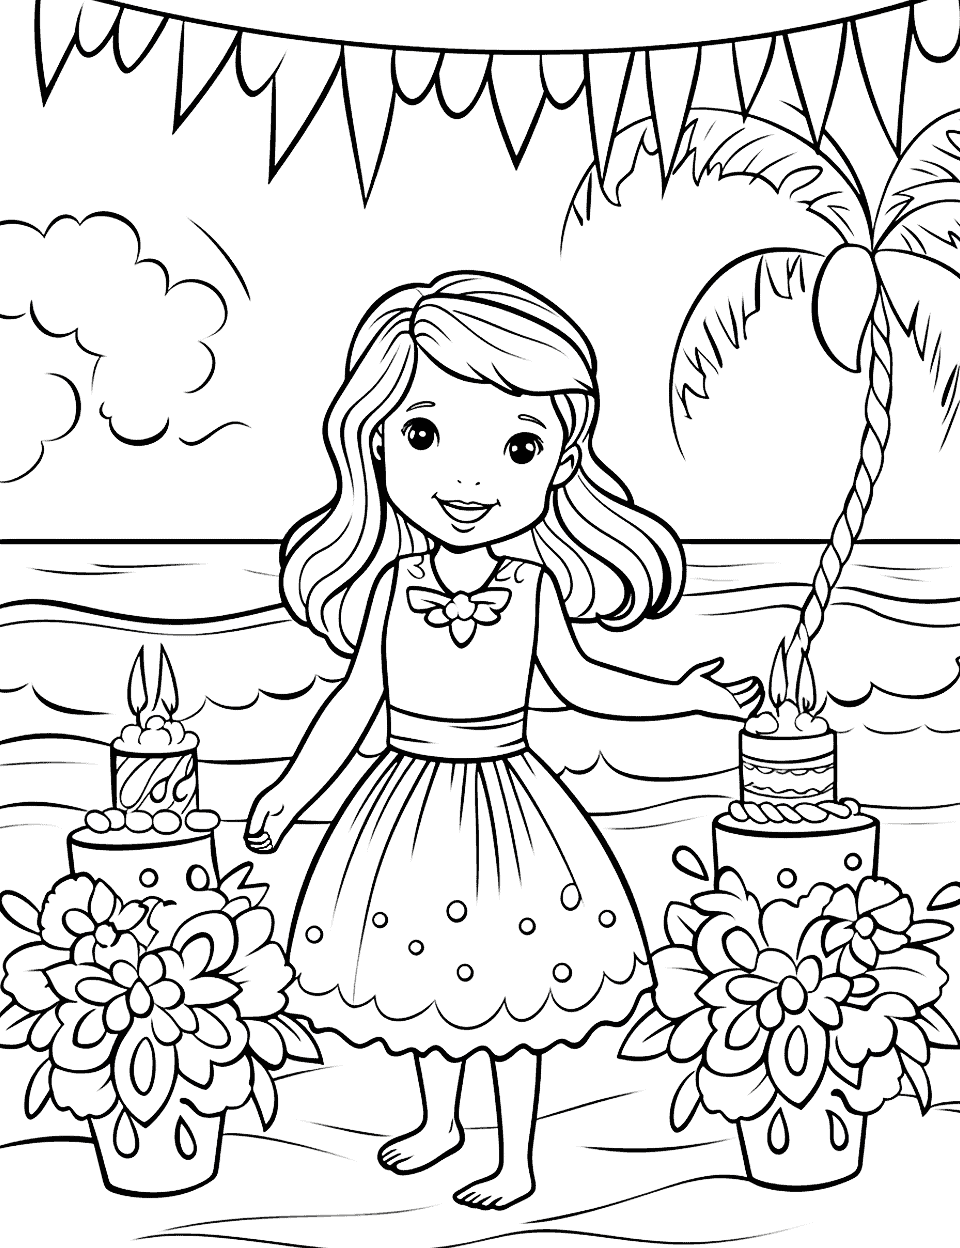 Hawaiian Luau Birthday Happy Coloring Page - A hula girl celebrating her birthday on the beach with a luau party.